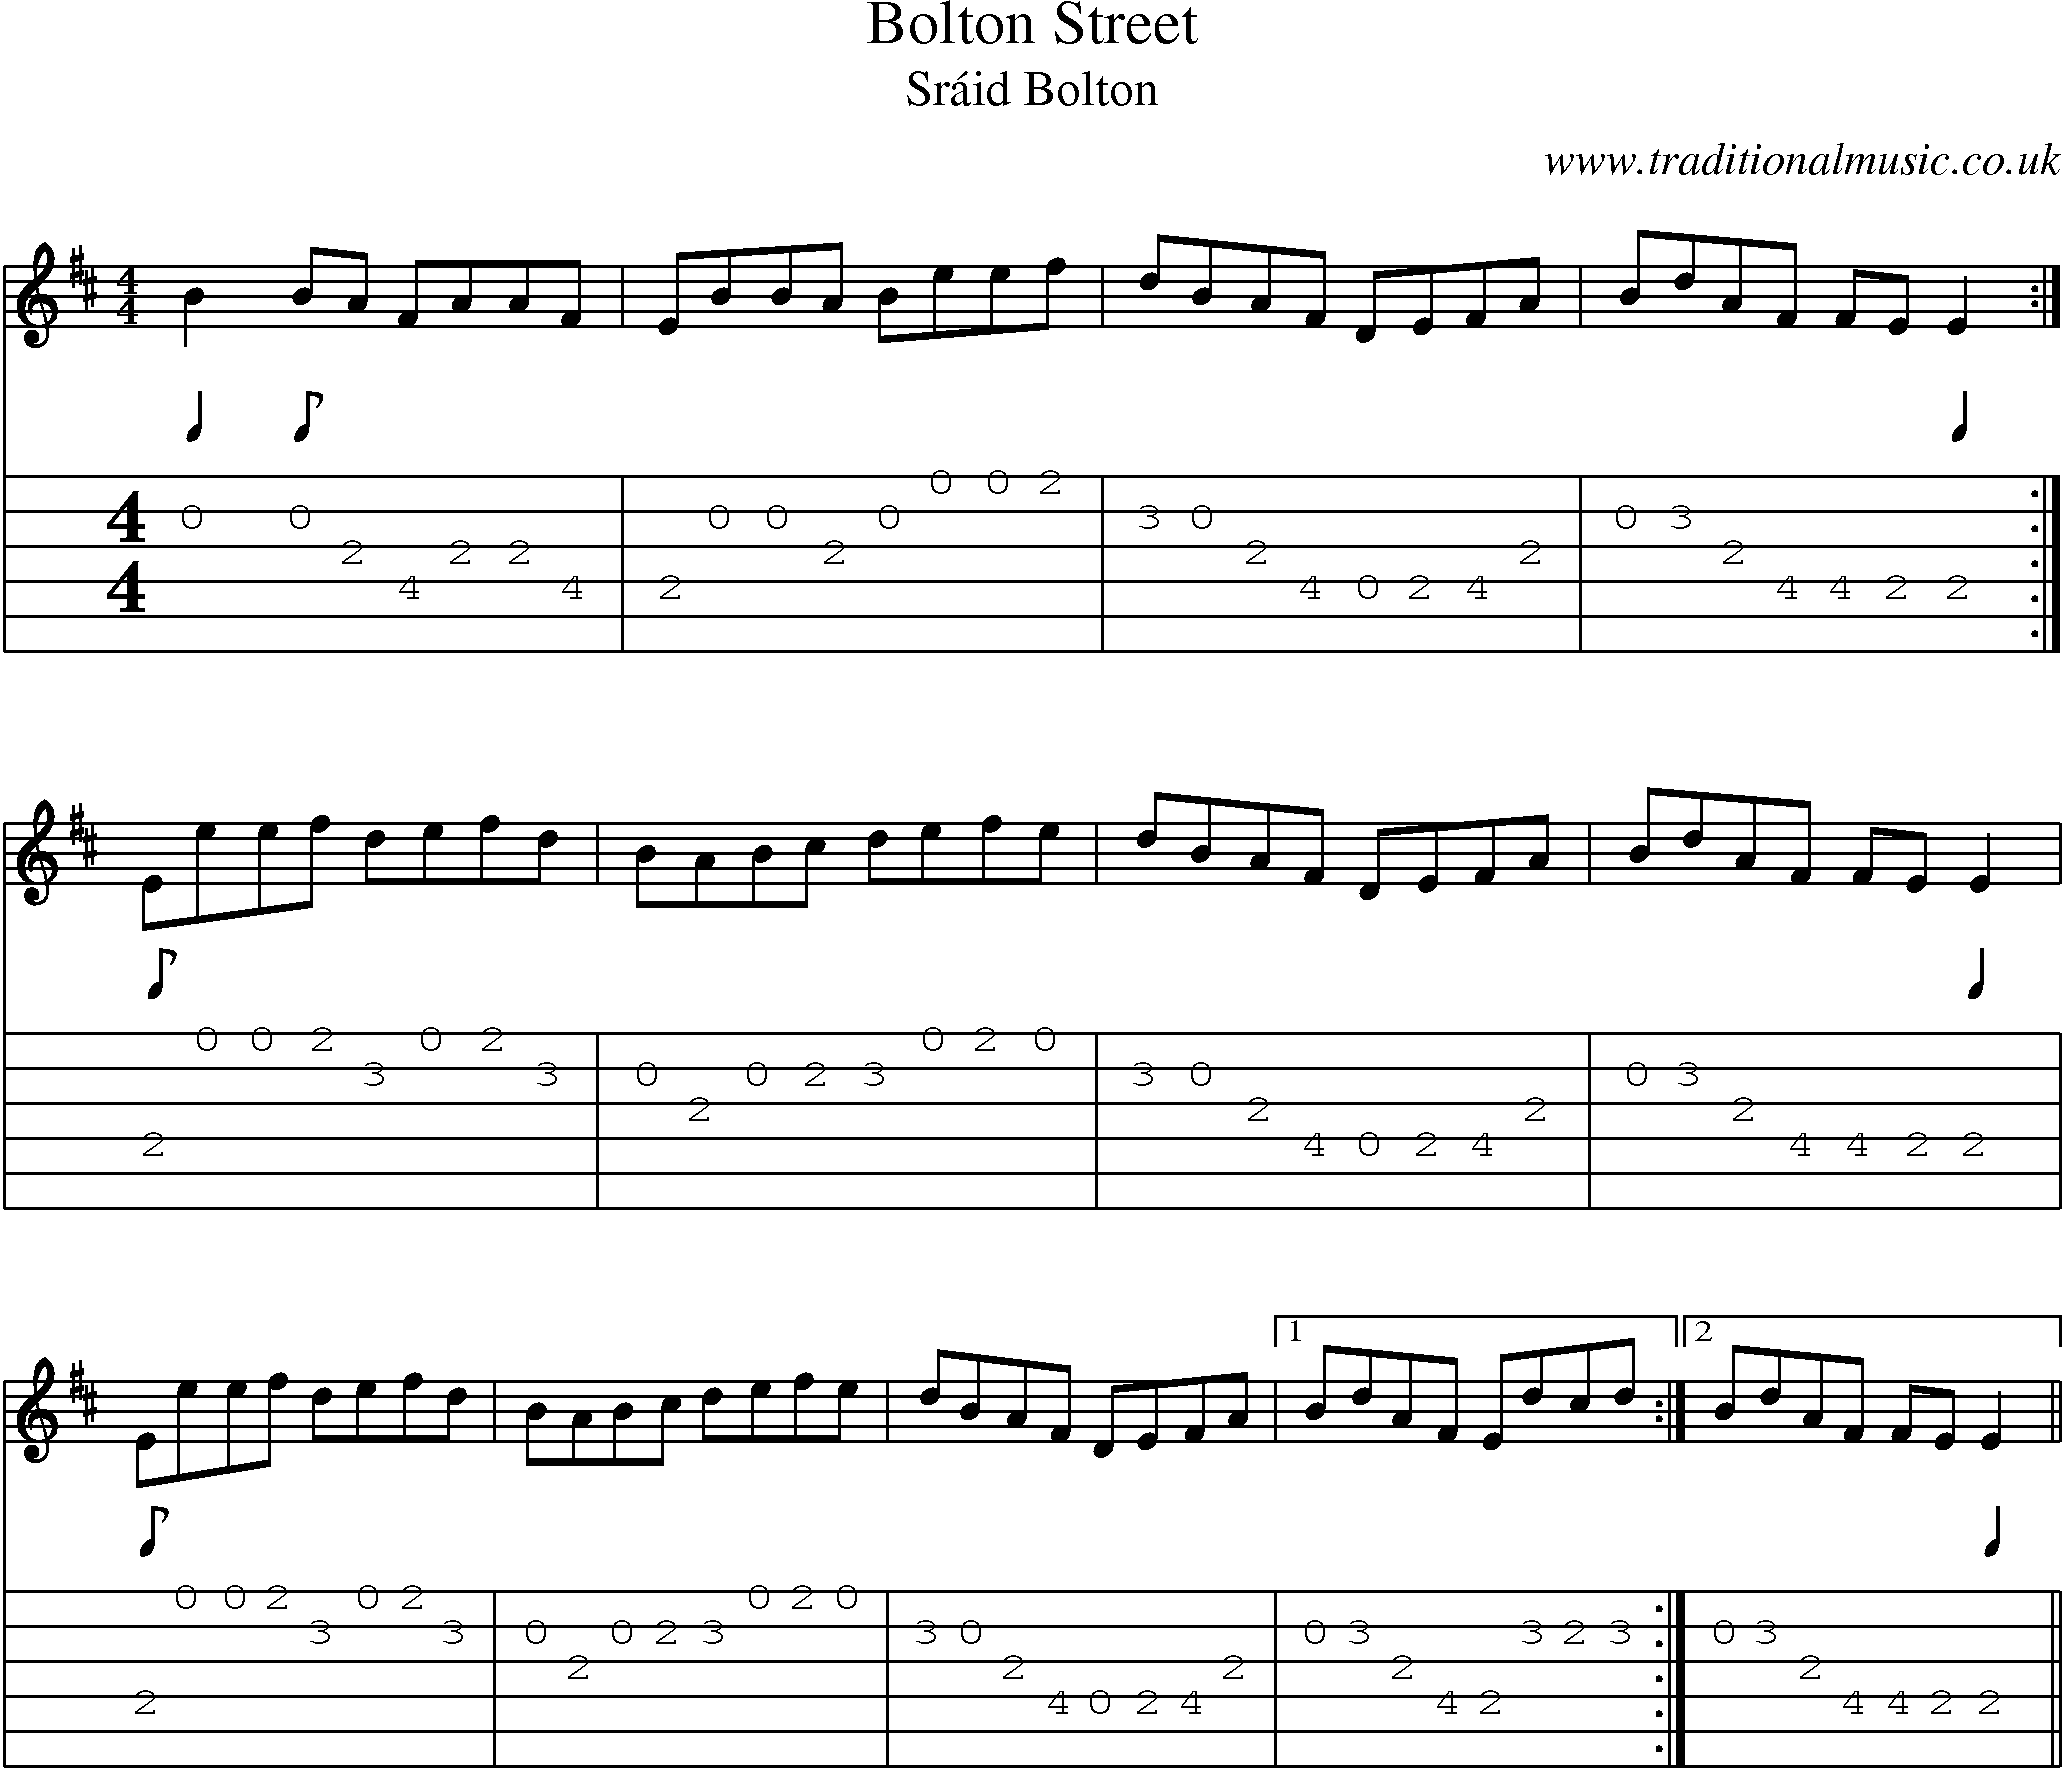 Music Score and Guitar Tabs for Bolton Street